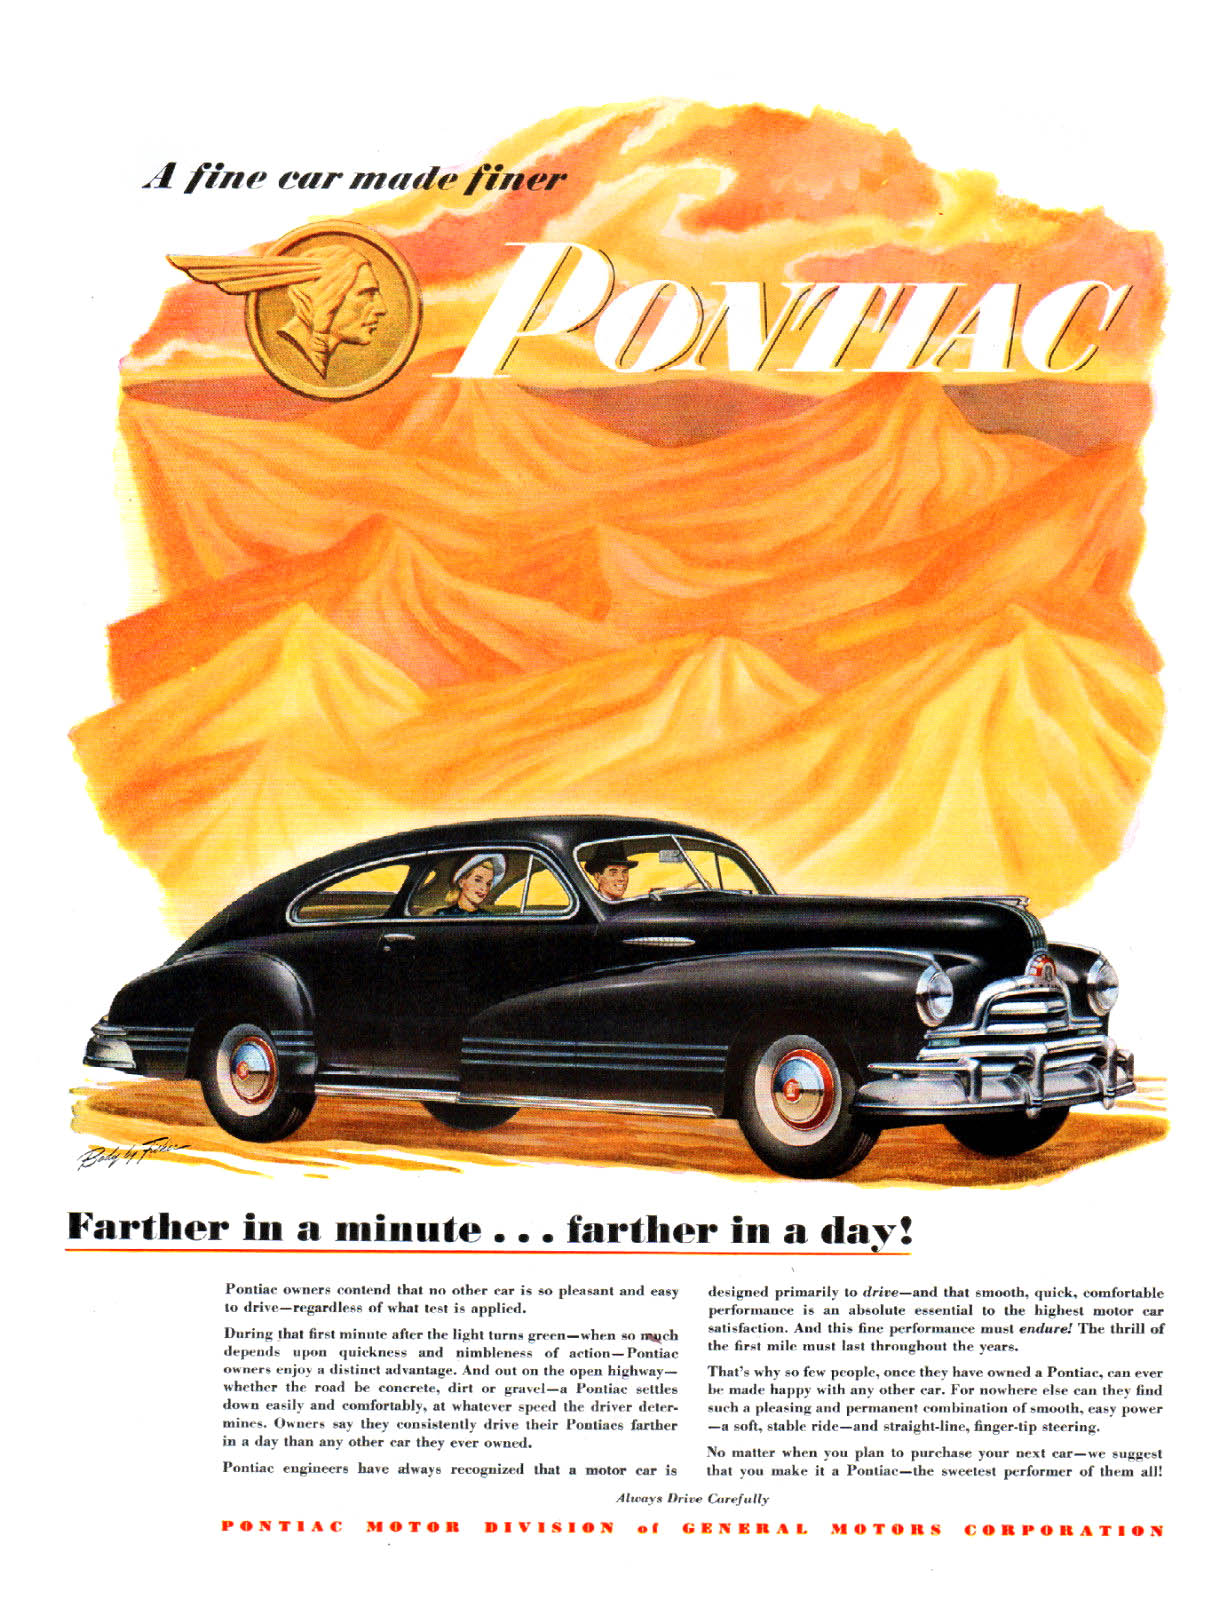 Pontiac Streamliner Sedan-Coupe Ad (September, 1947): Farther in a minute... farther in a day!